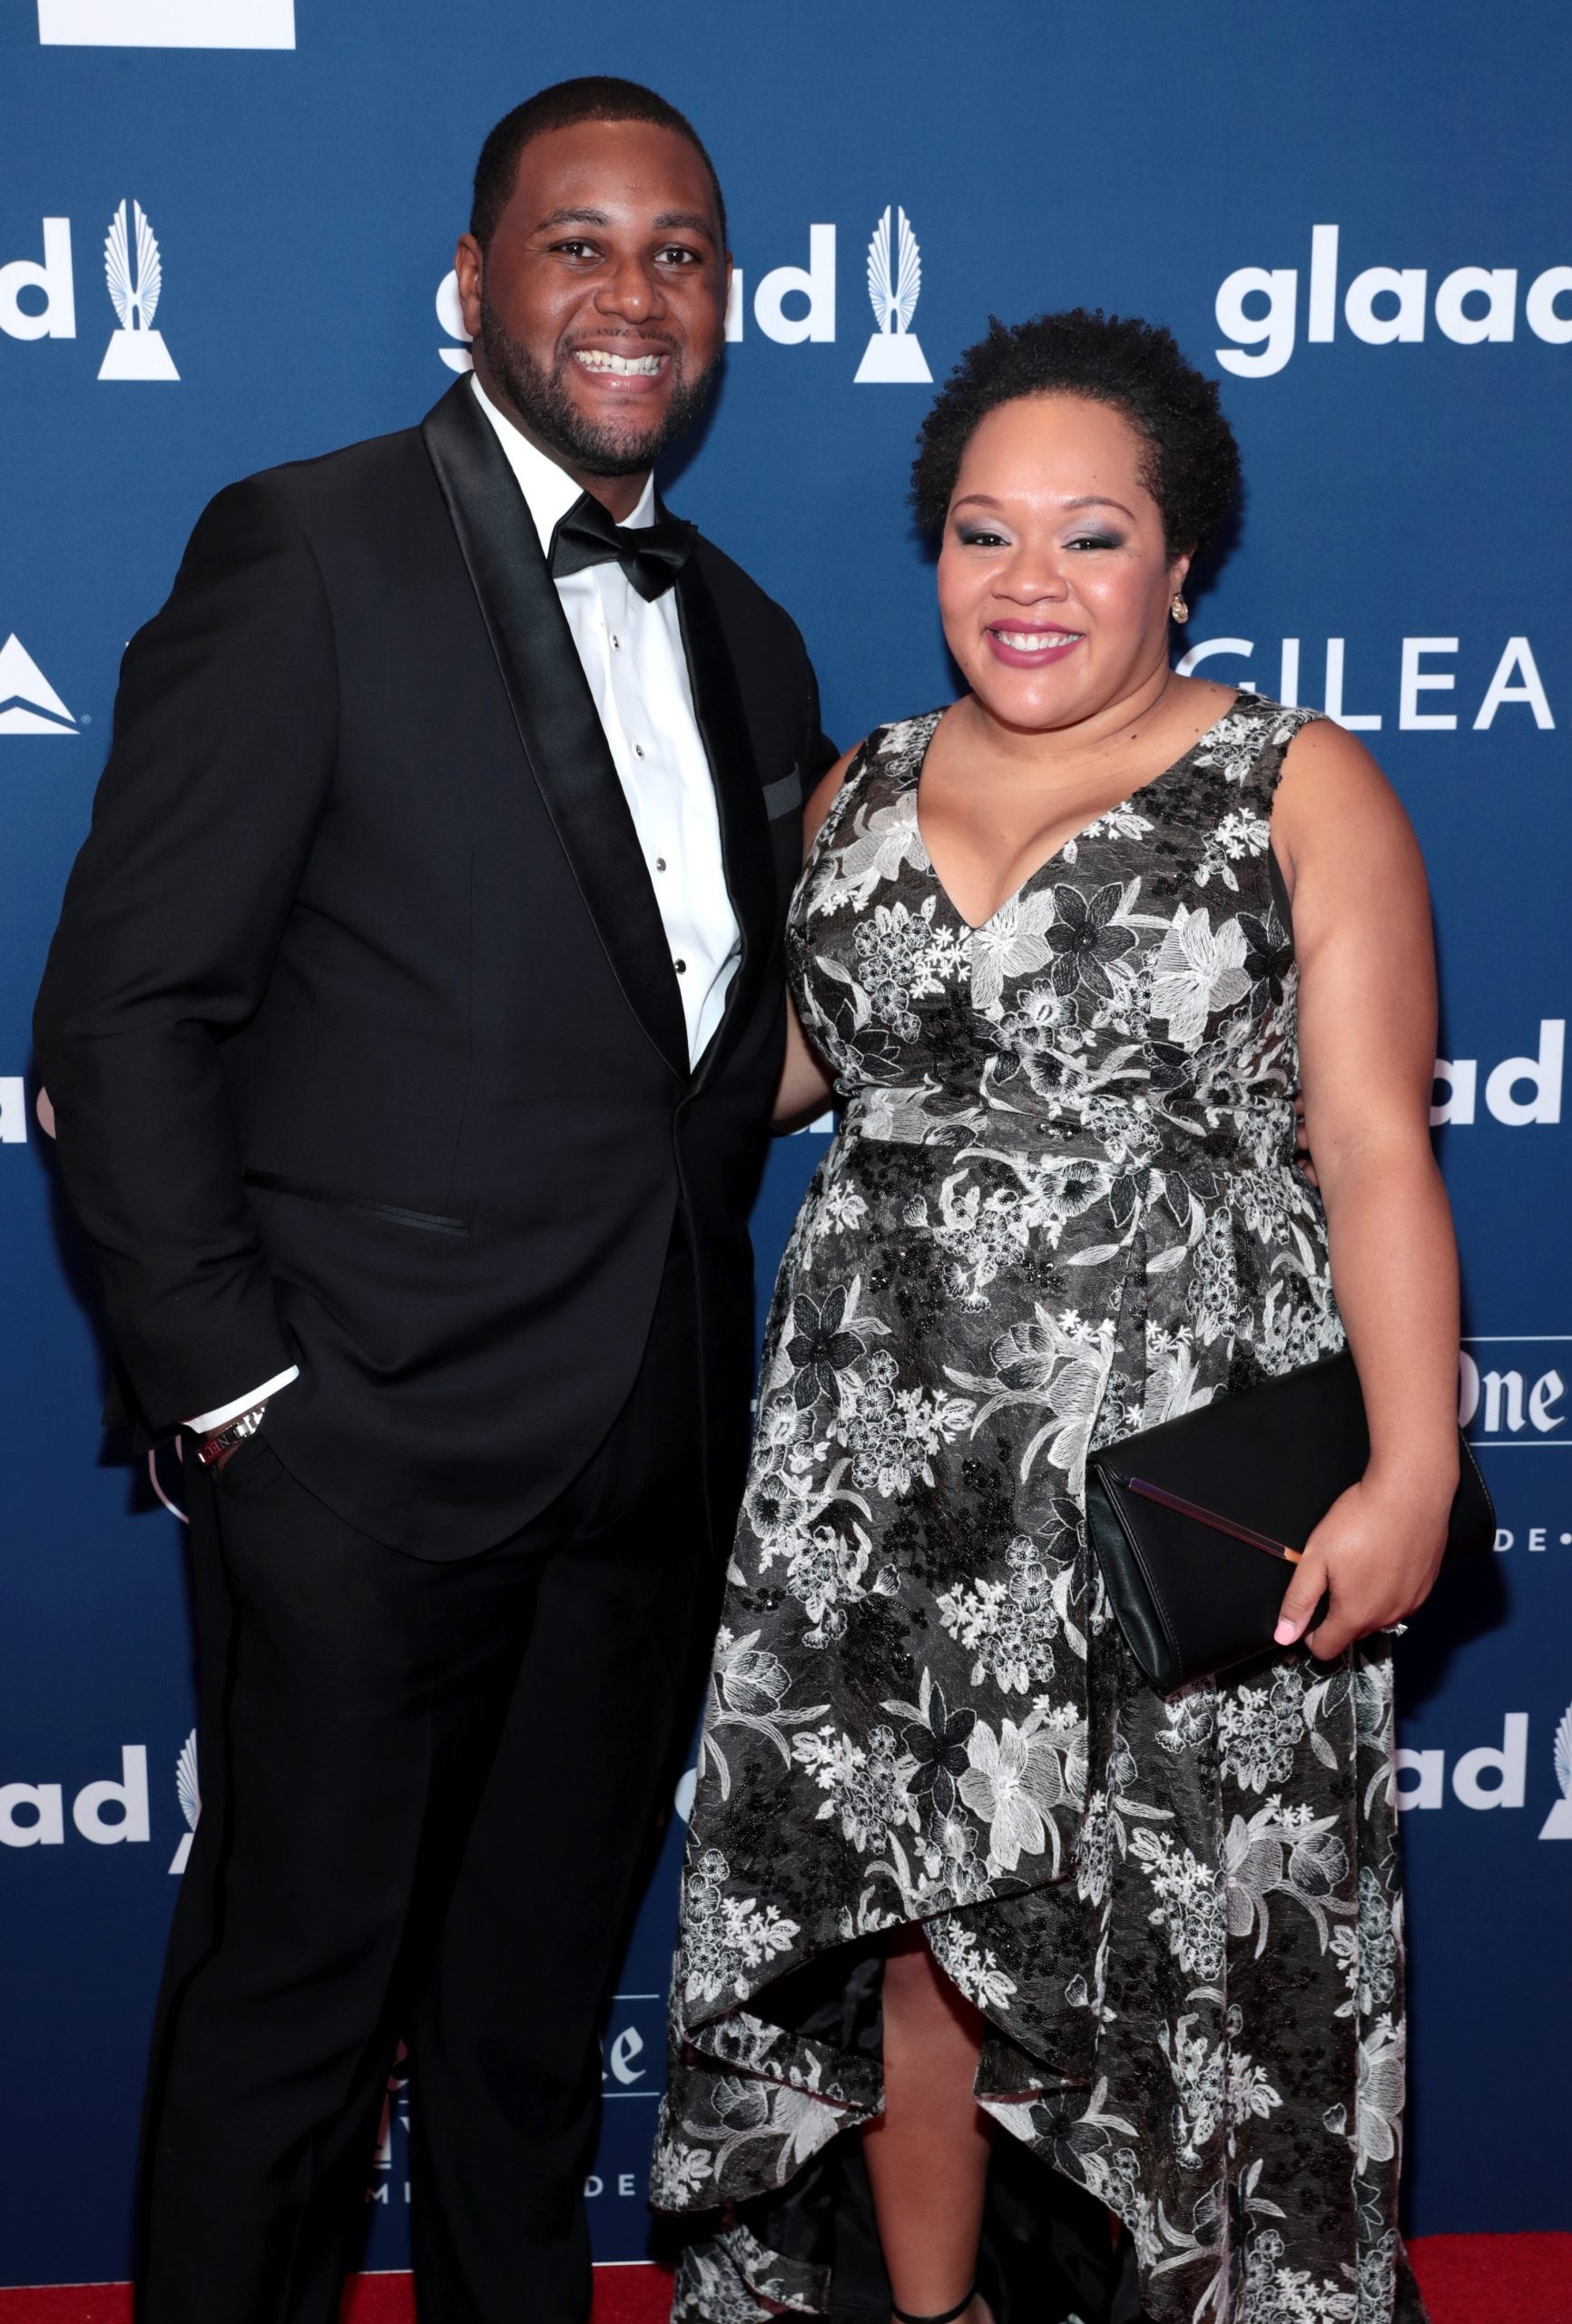 Meet Yrie! NBC’s Yamiche Alcindor Welcomes Son Following ‘Harrowing’ IVF Journey